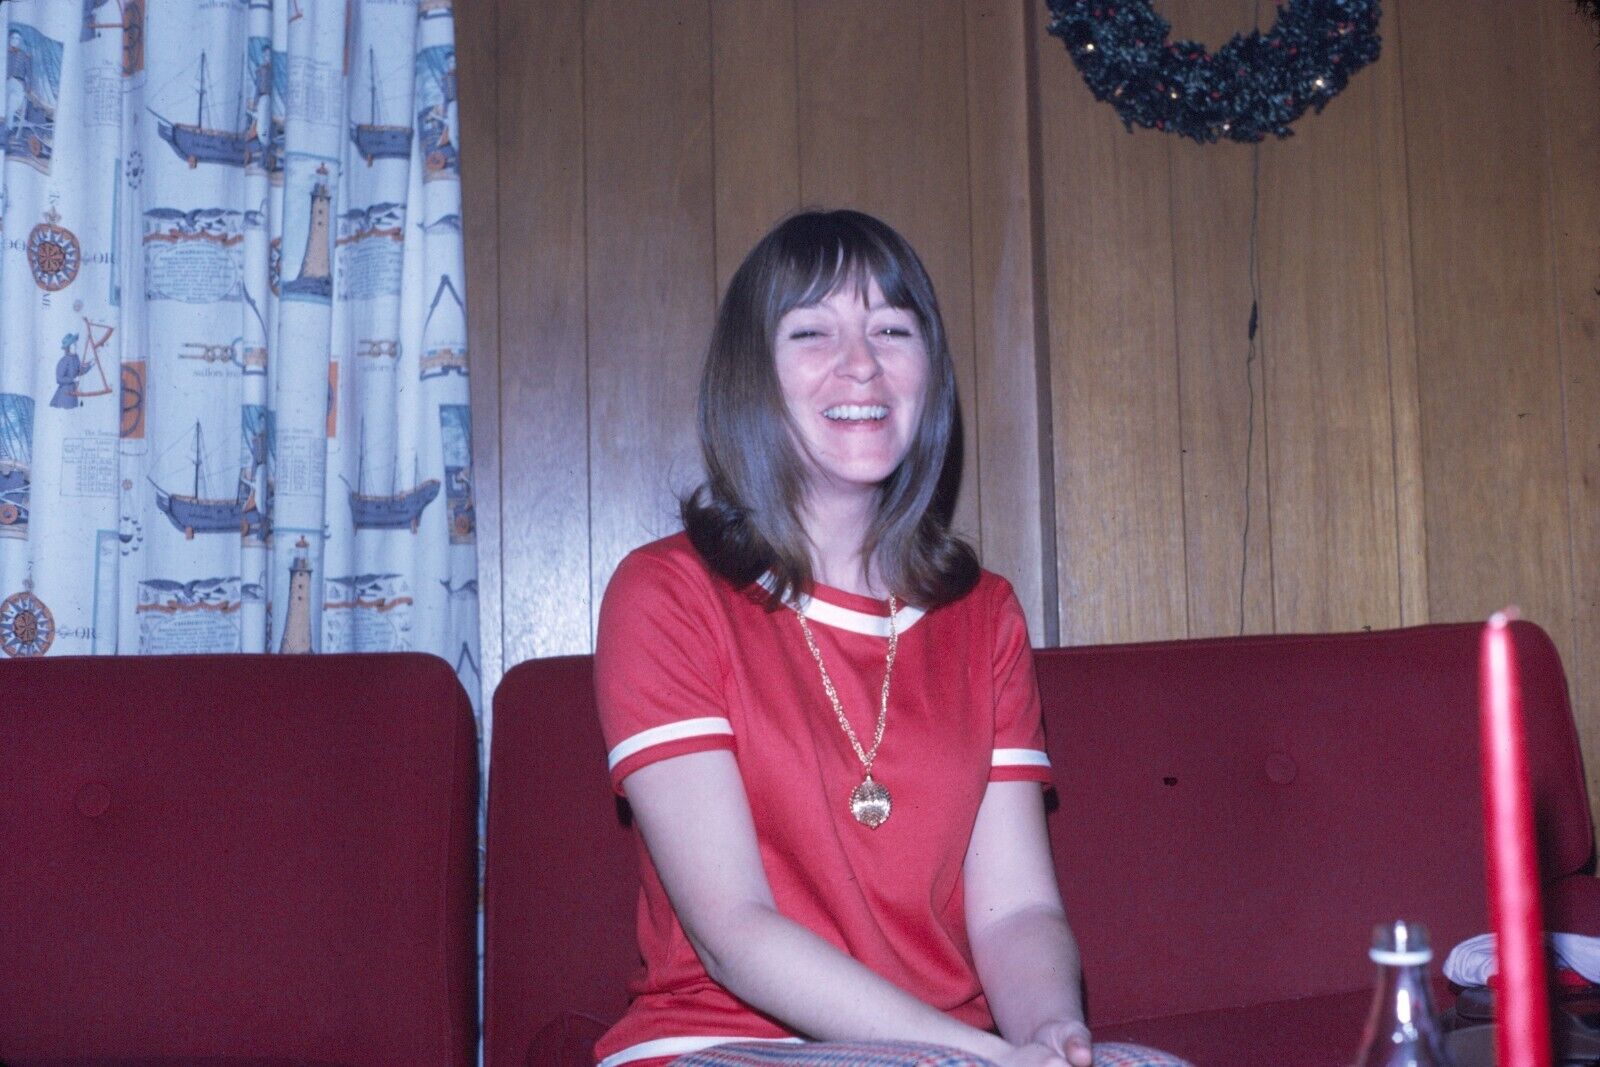 1972 Young Woman Smiling on Couch #3 Vintage 35mm Slide